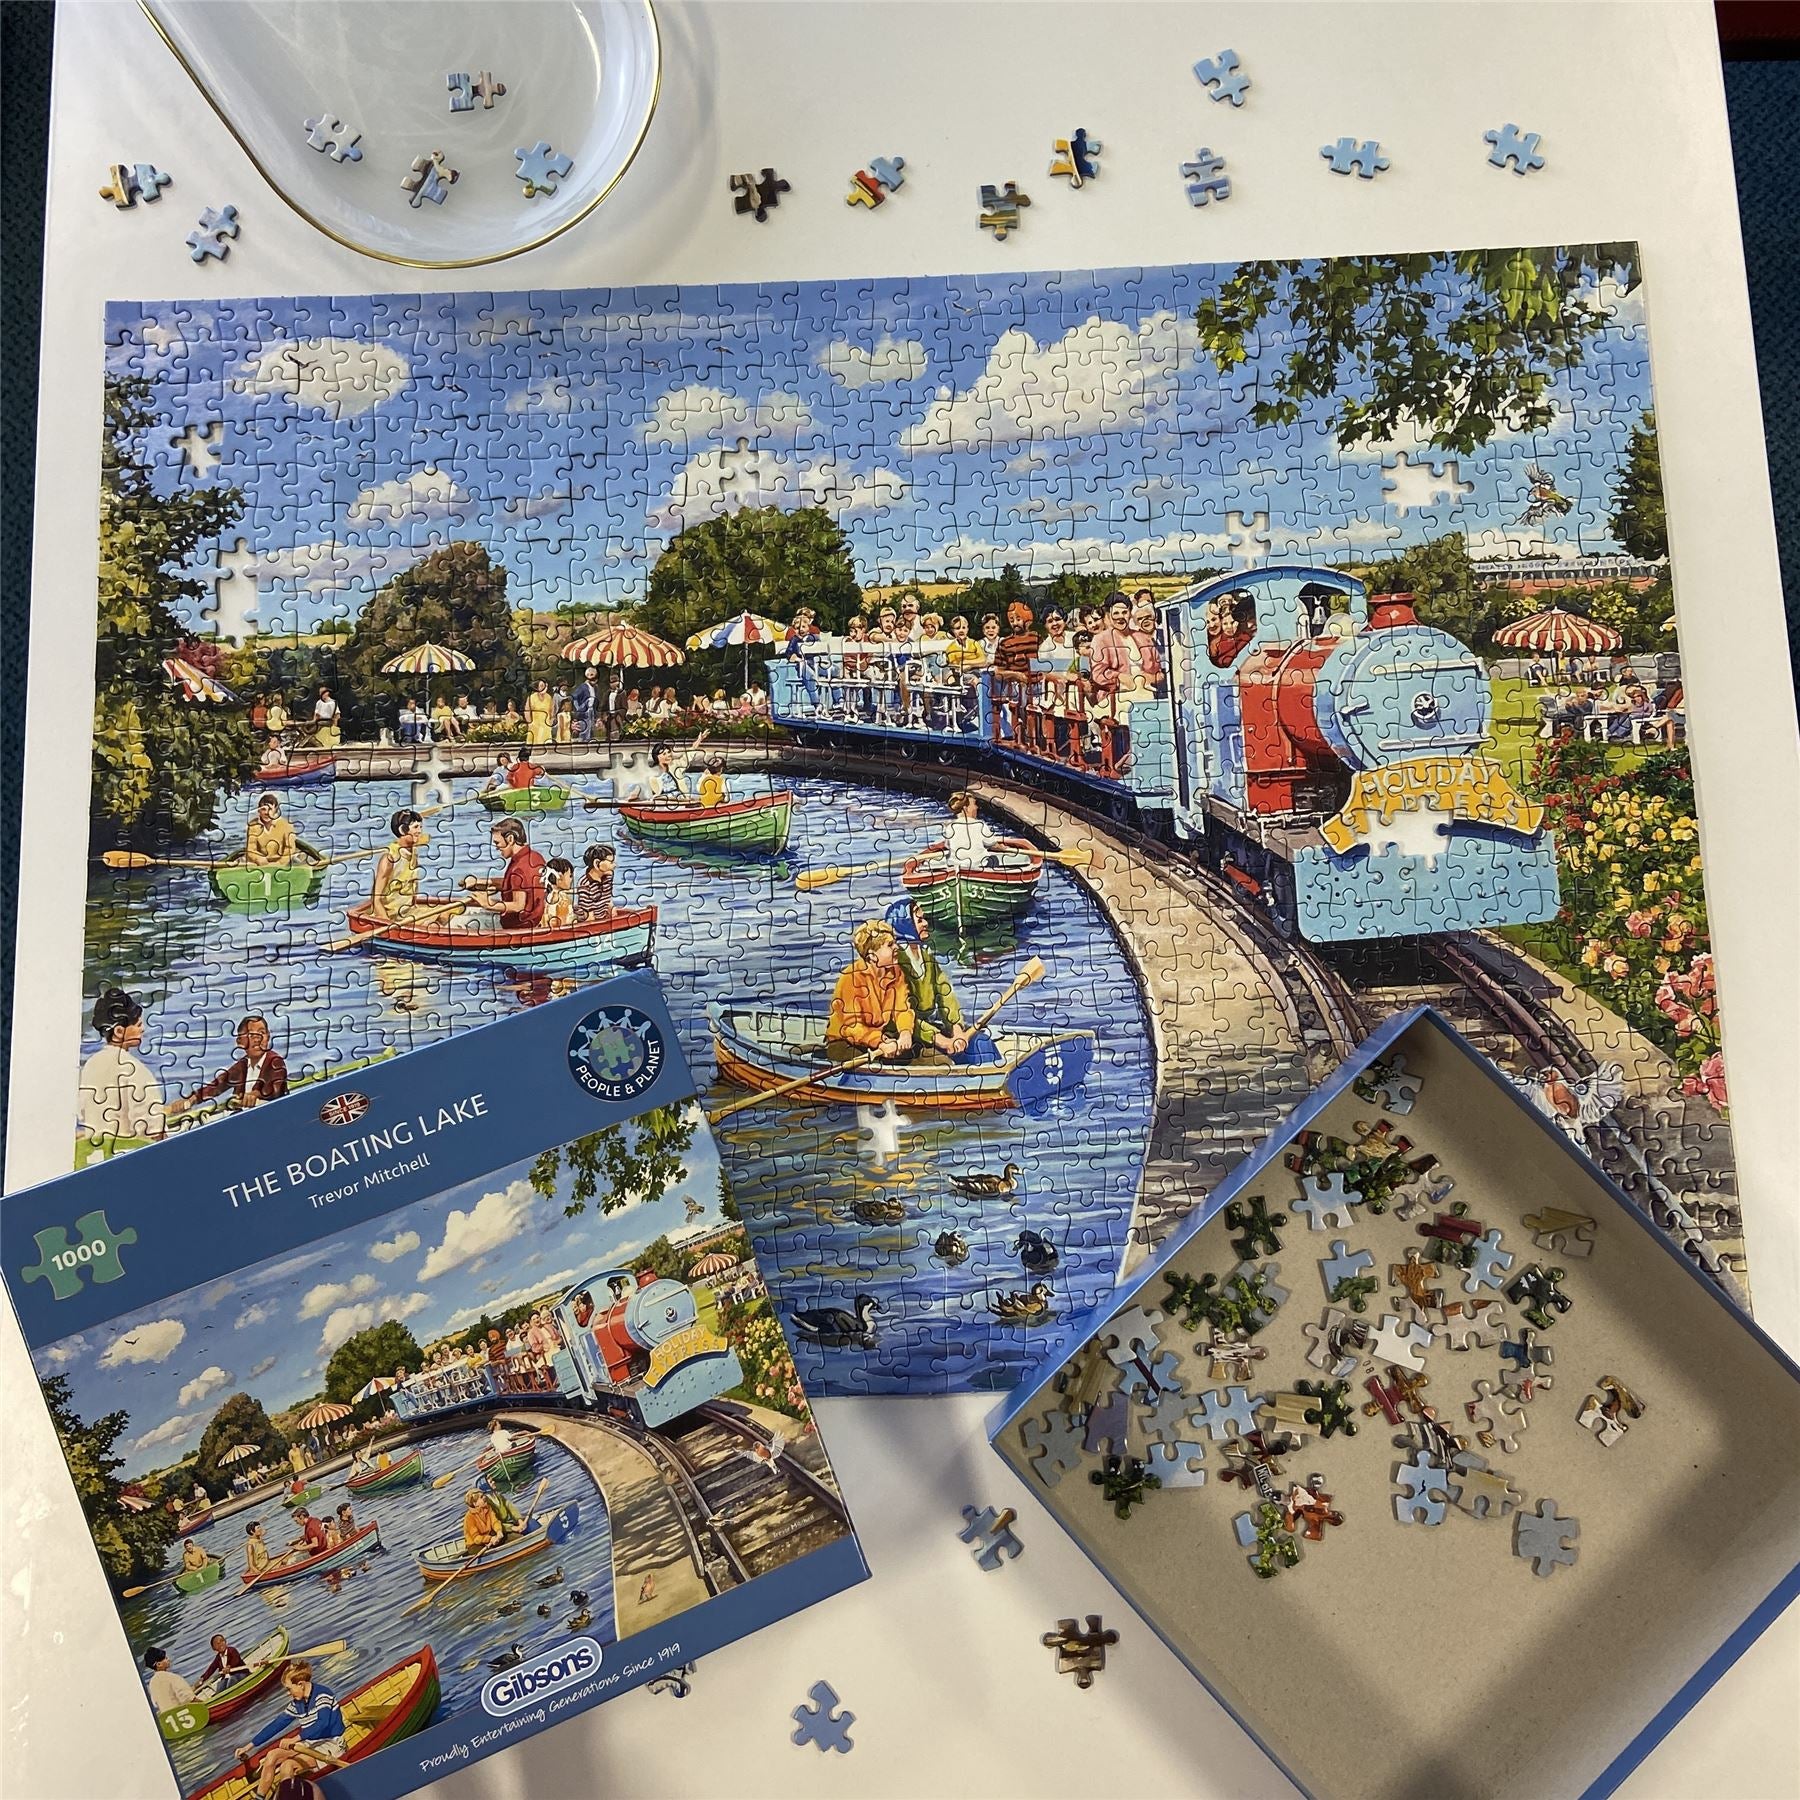 The Boating Lake 1000 Piece Jigsaw Puzzle